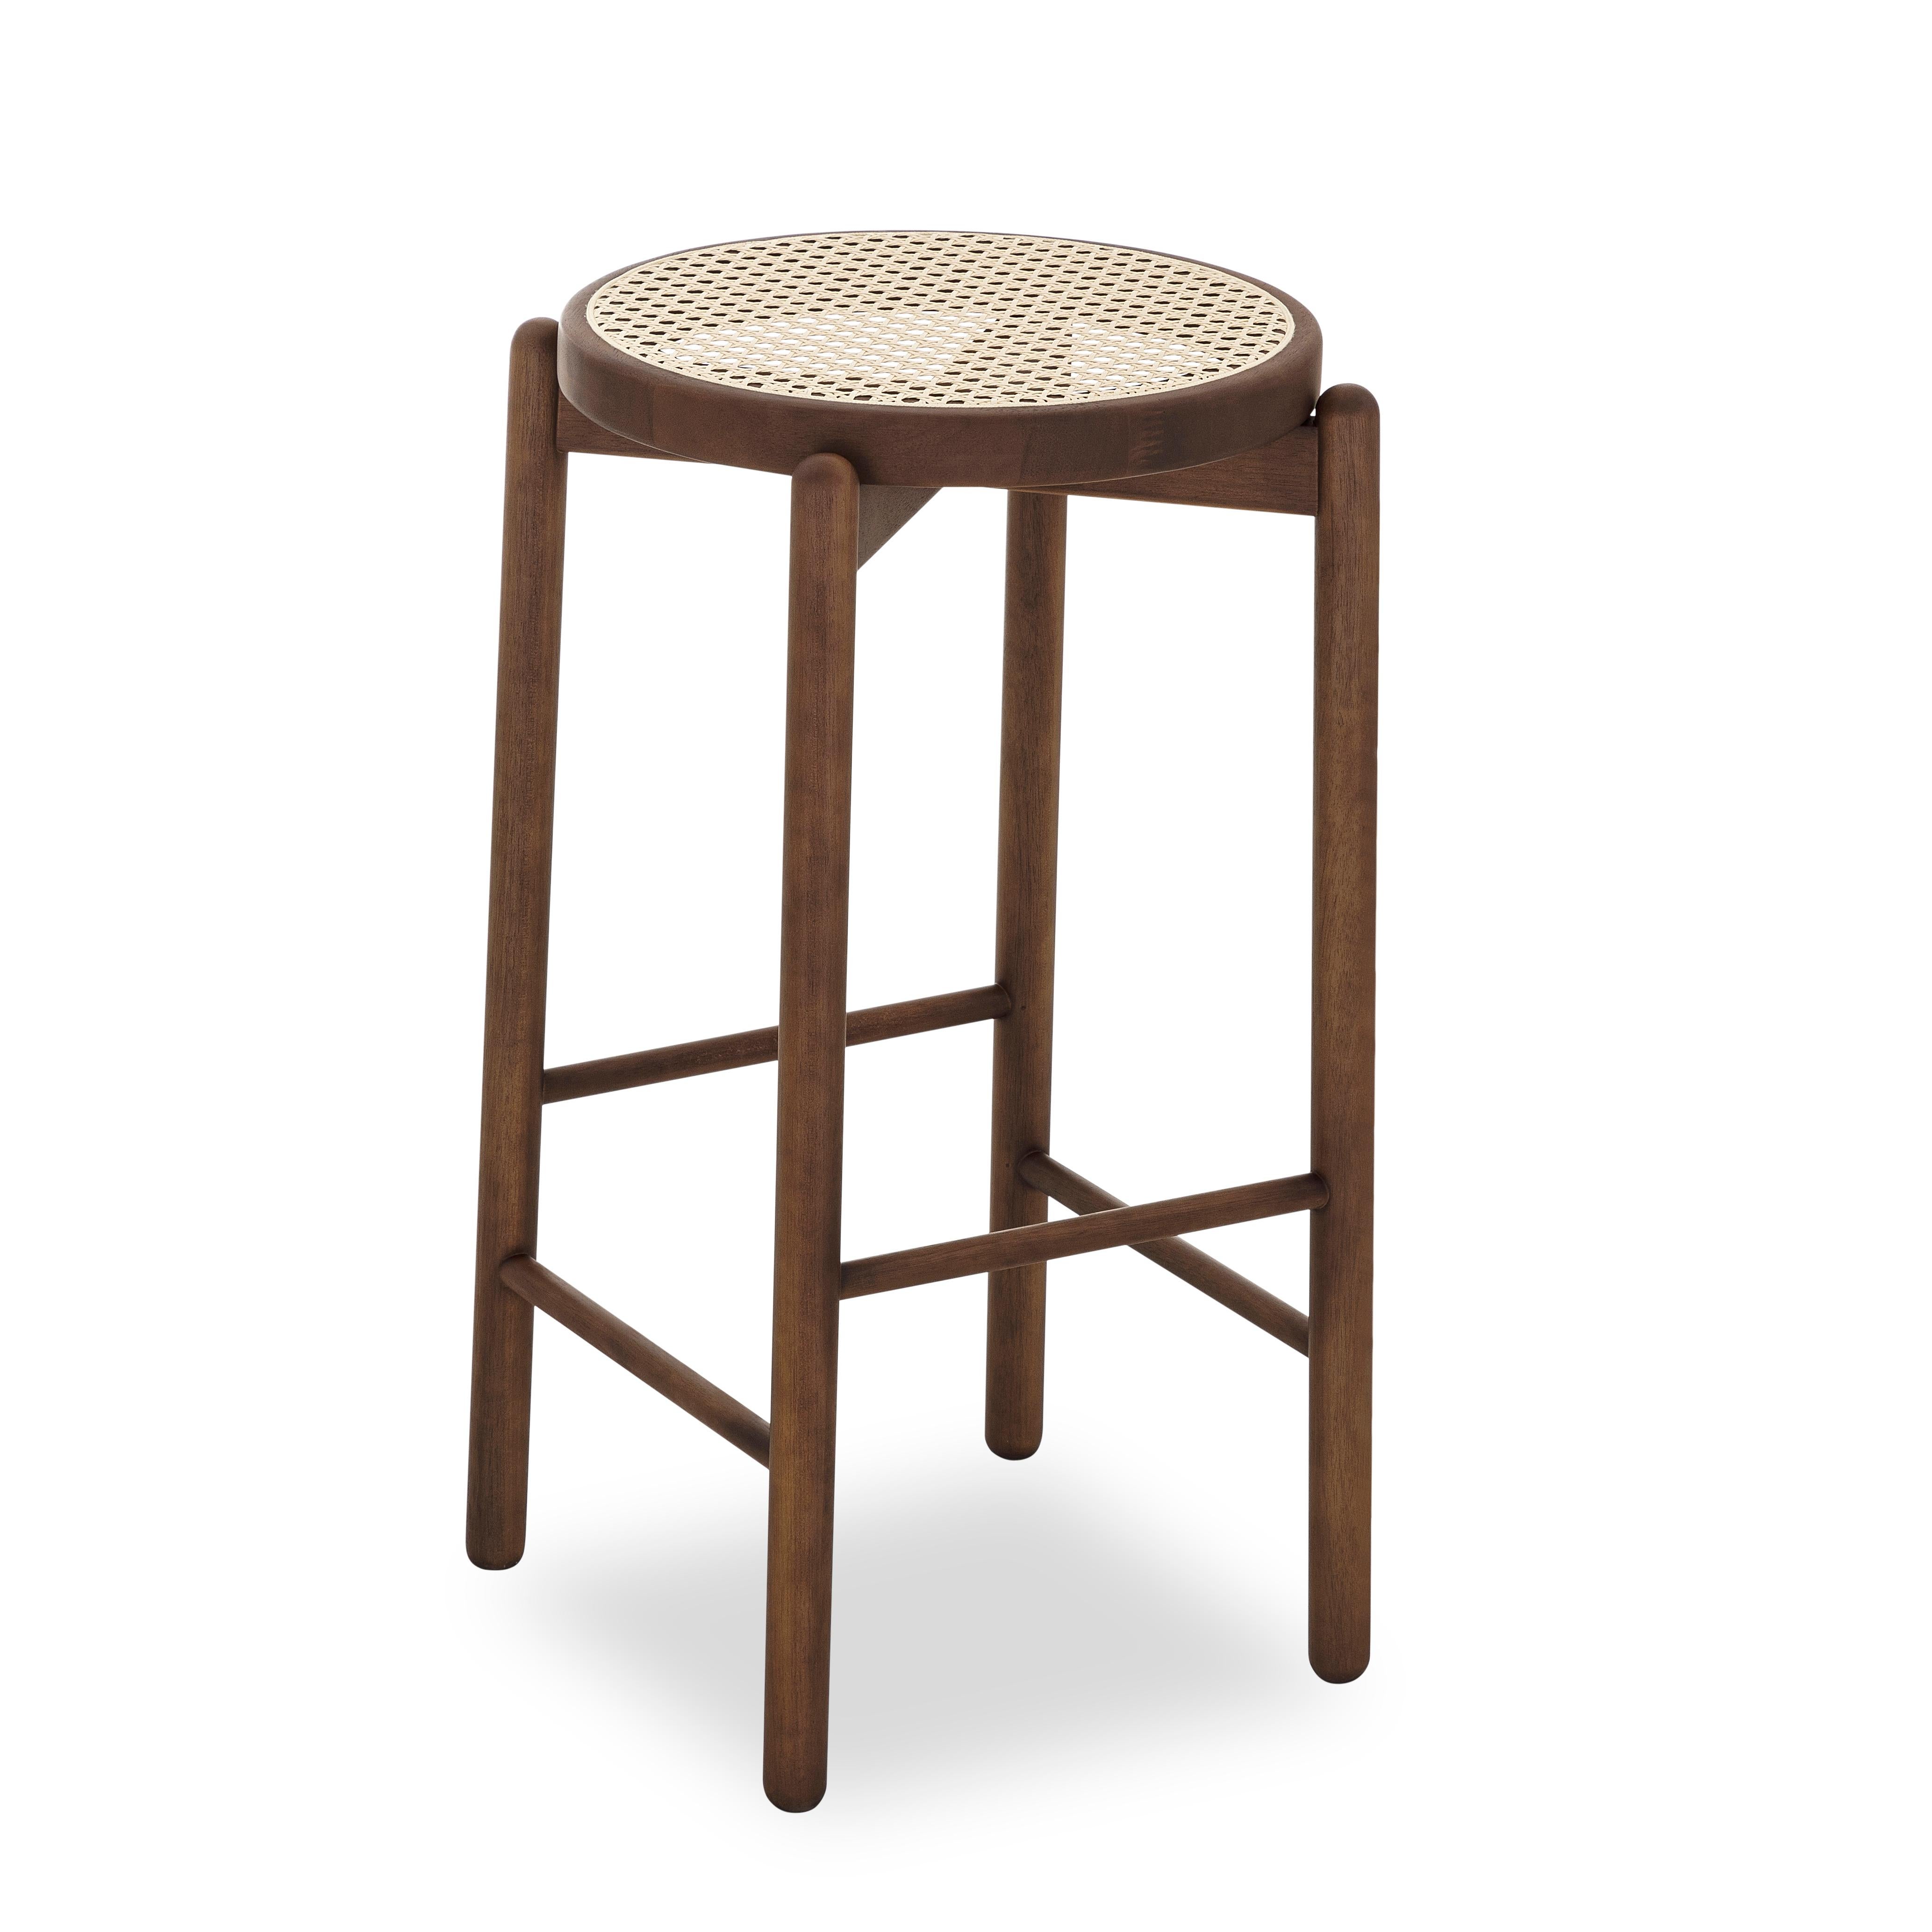 Maru Counter Stool in Walnut Wood Finish Base and Cane Seat In New Condition For Sale In Miami, FL